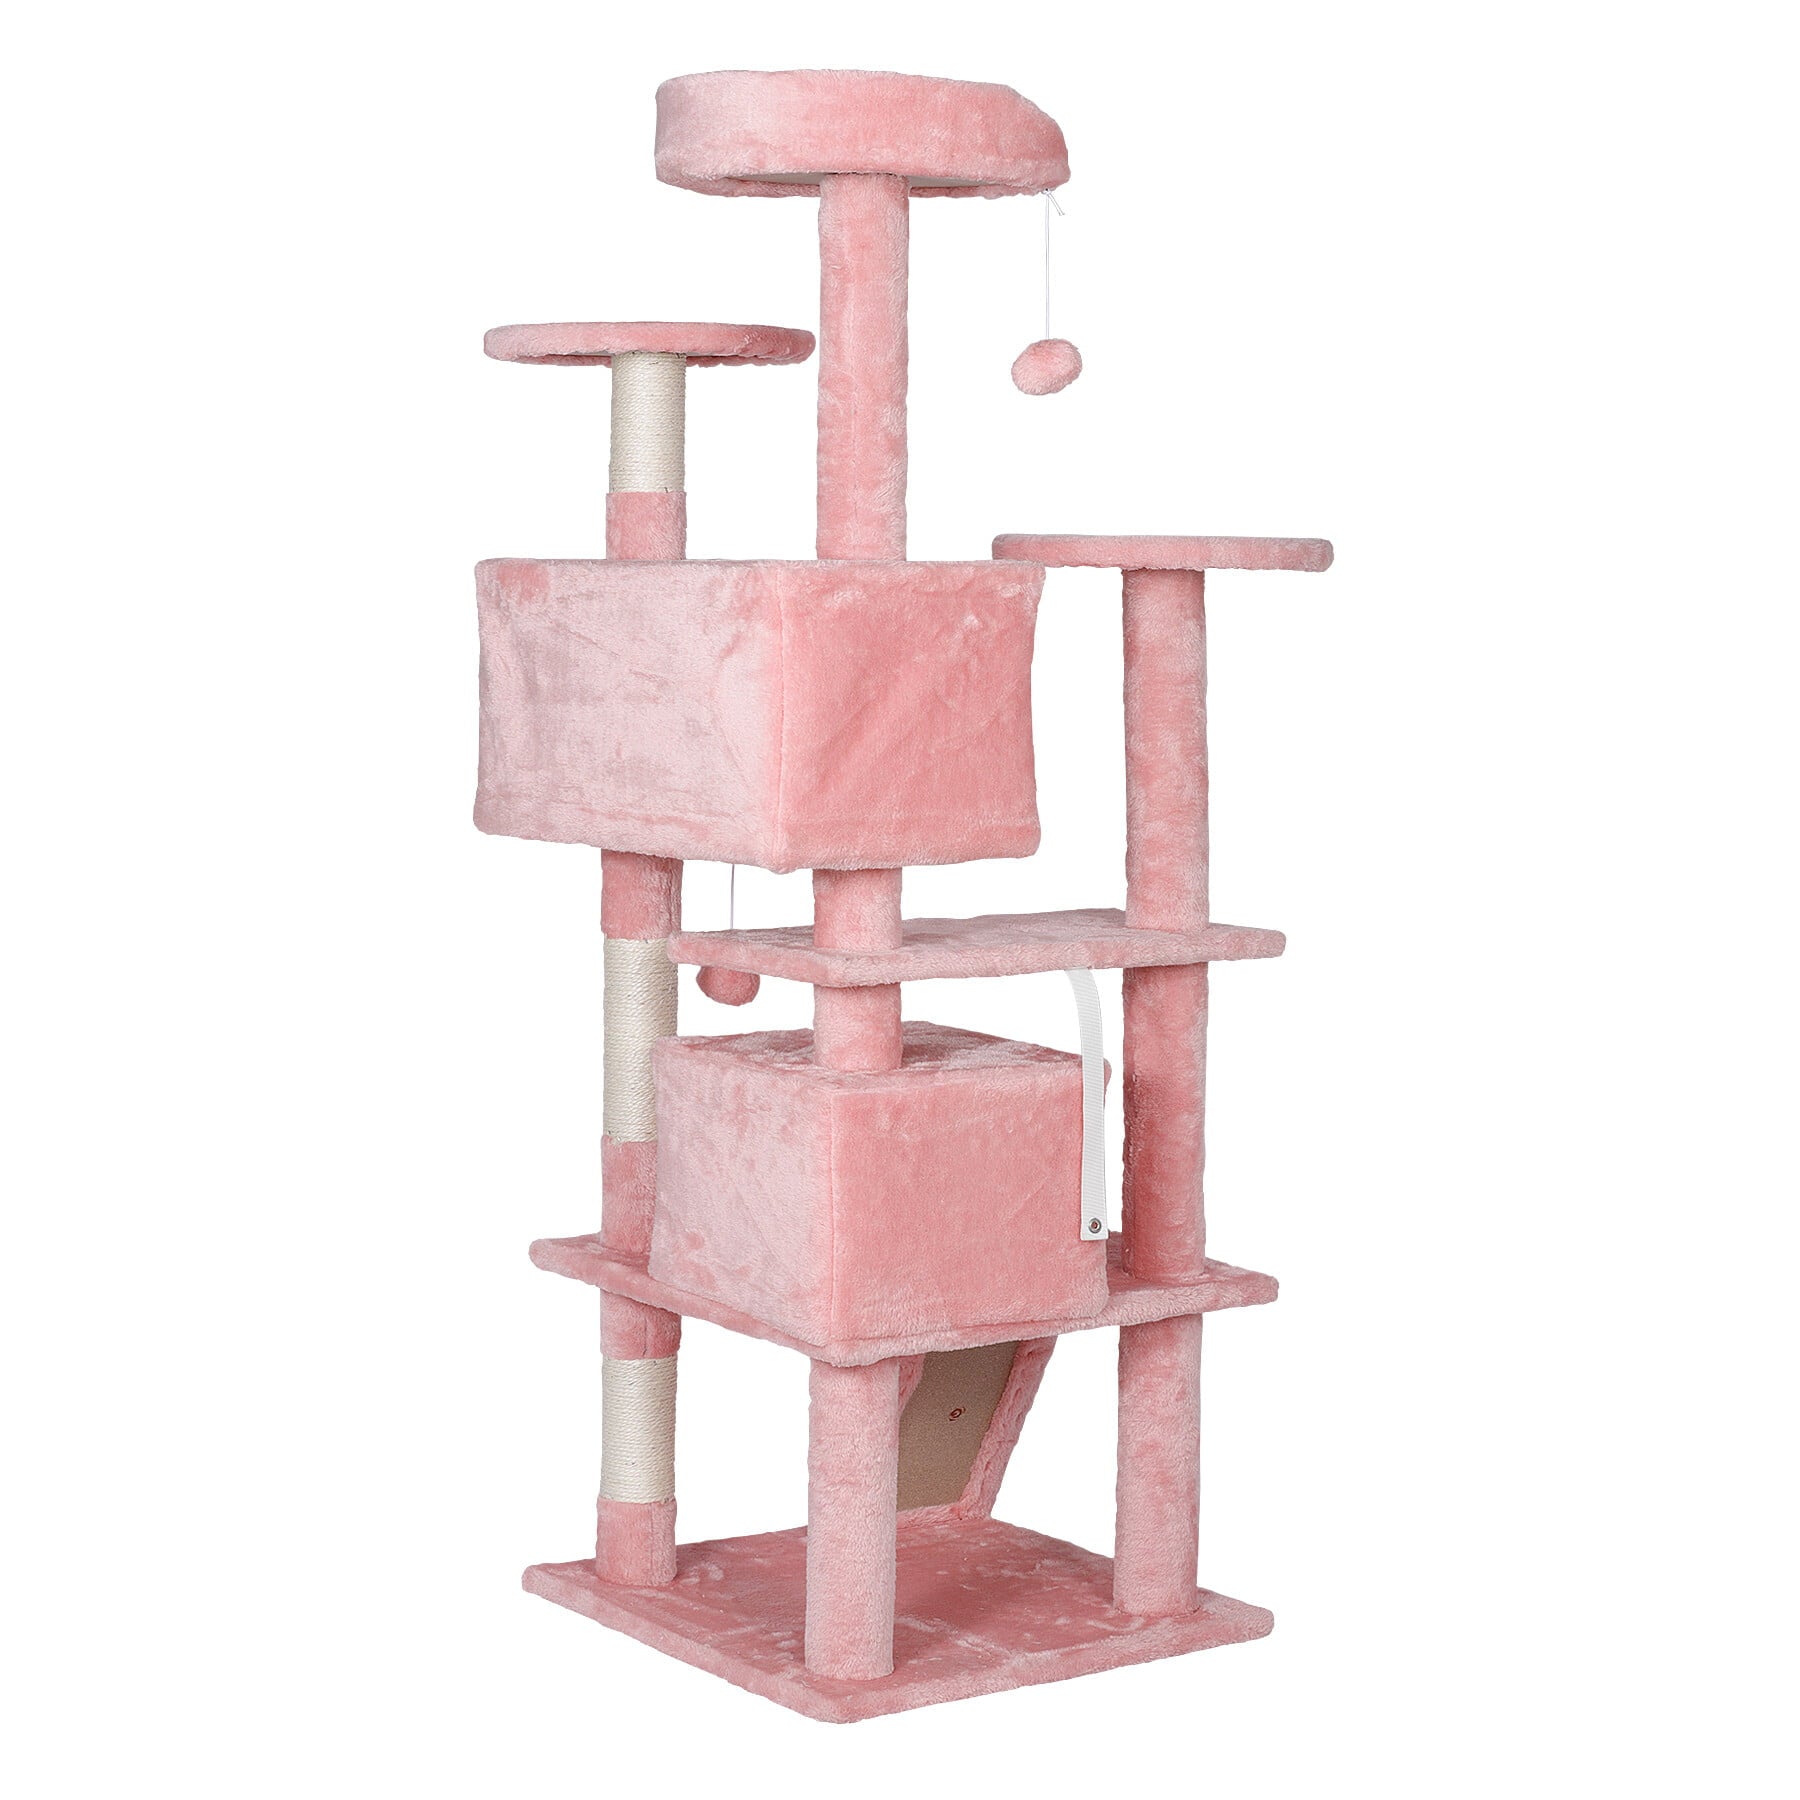 ZENSTYLE 55-in H Cat Tree and Condo Scratching Post Tower， Pink